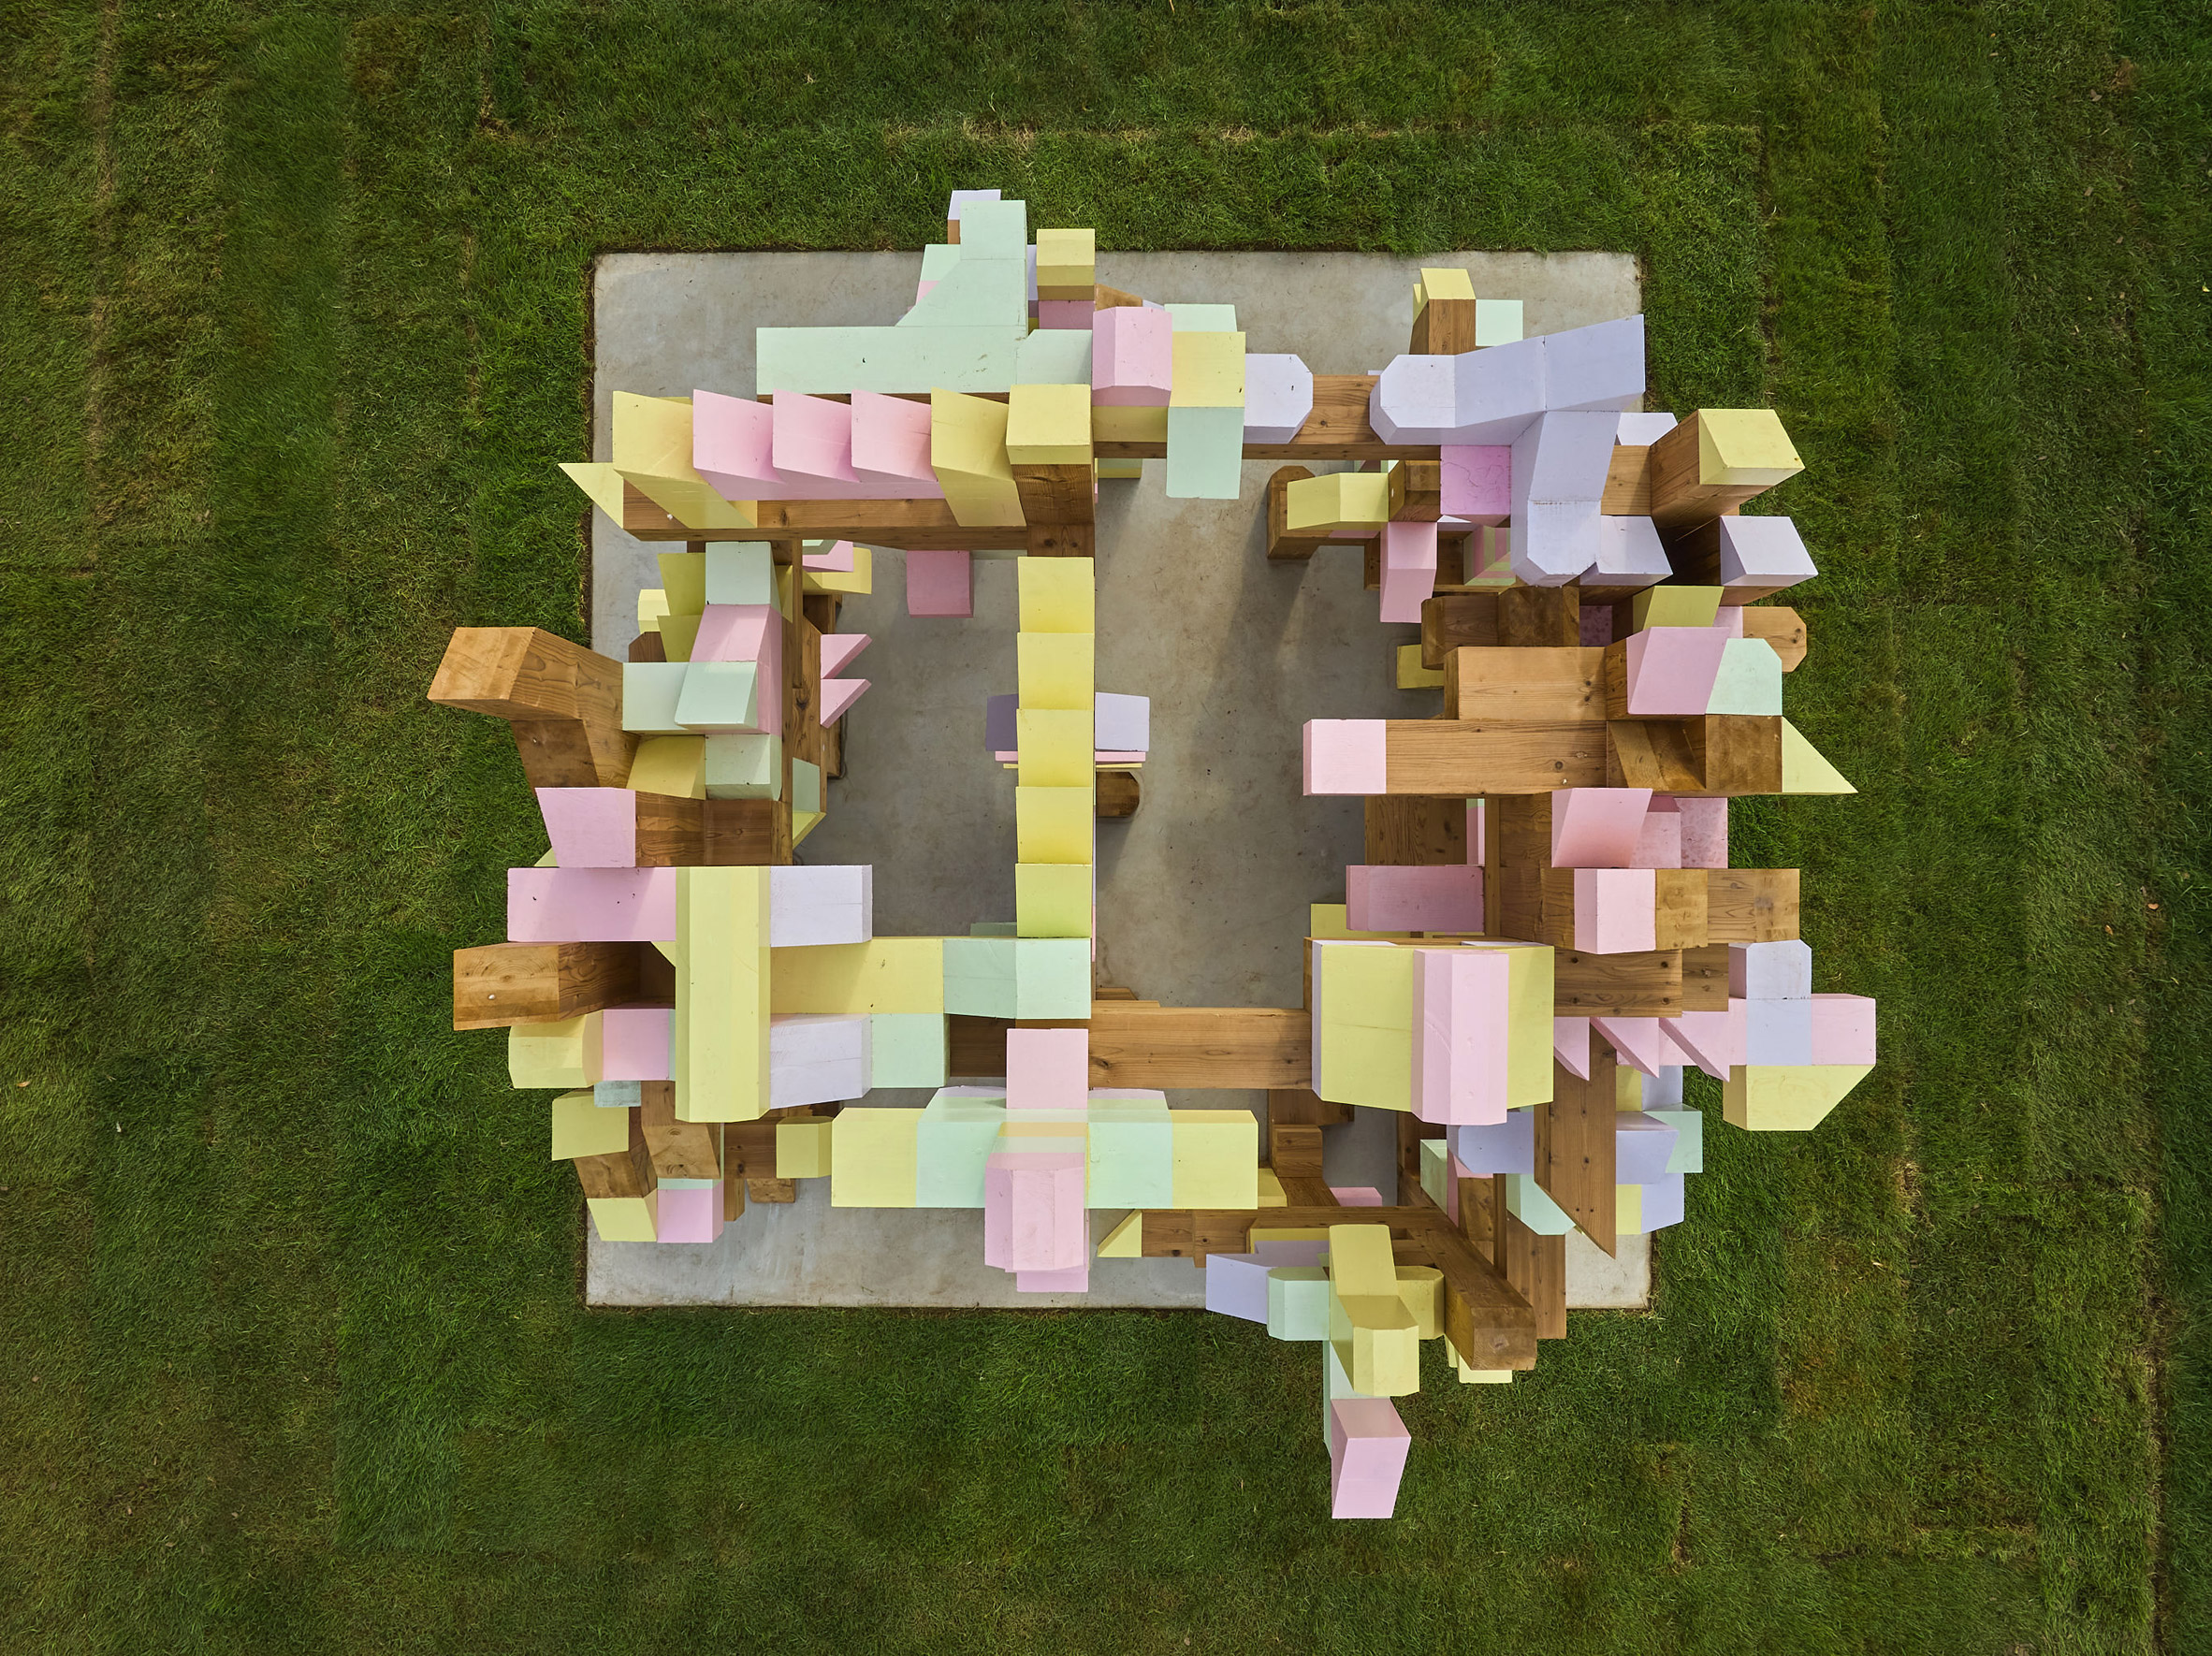 Aerial view of Fungible Non-Fungible Pavilion at Tallinn Architecture Biennale